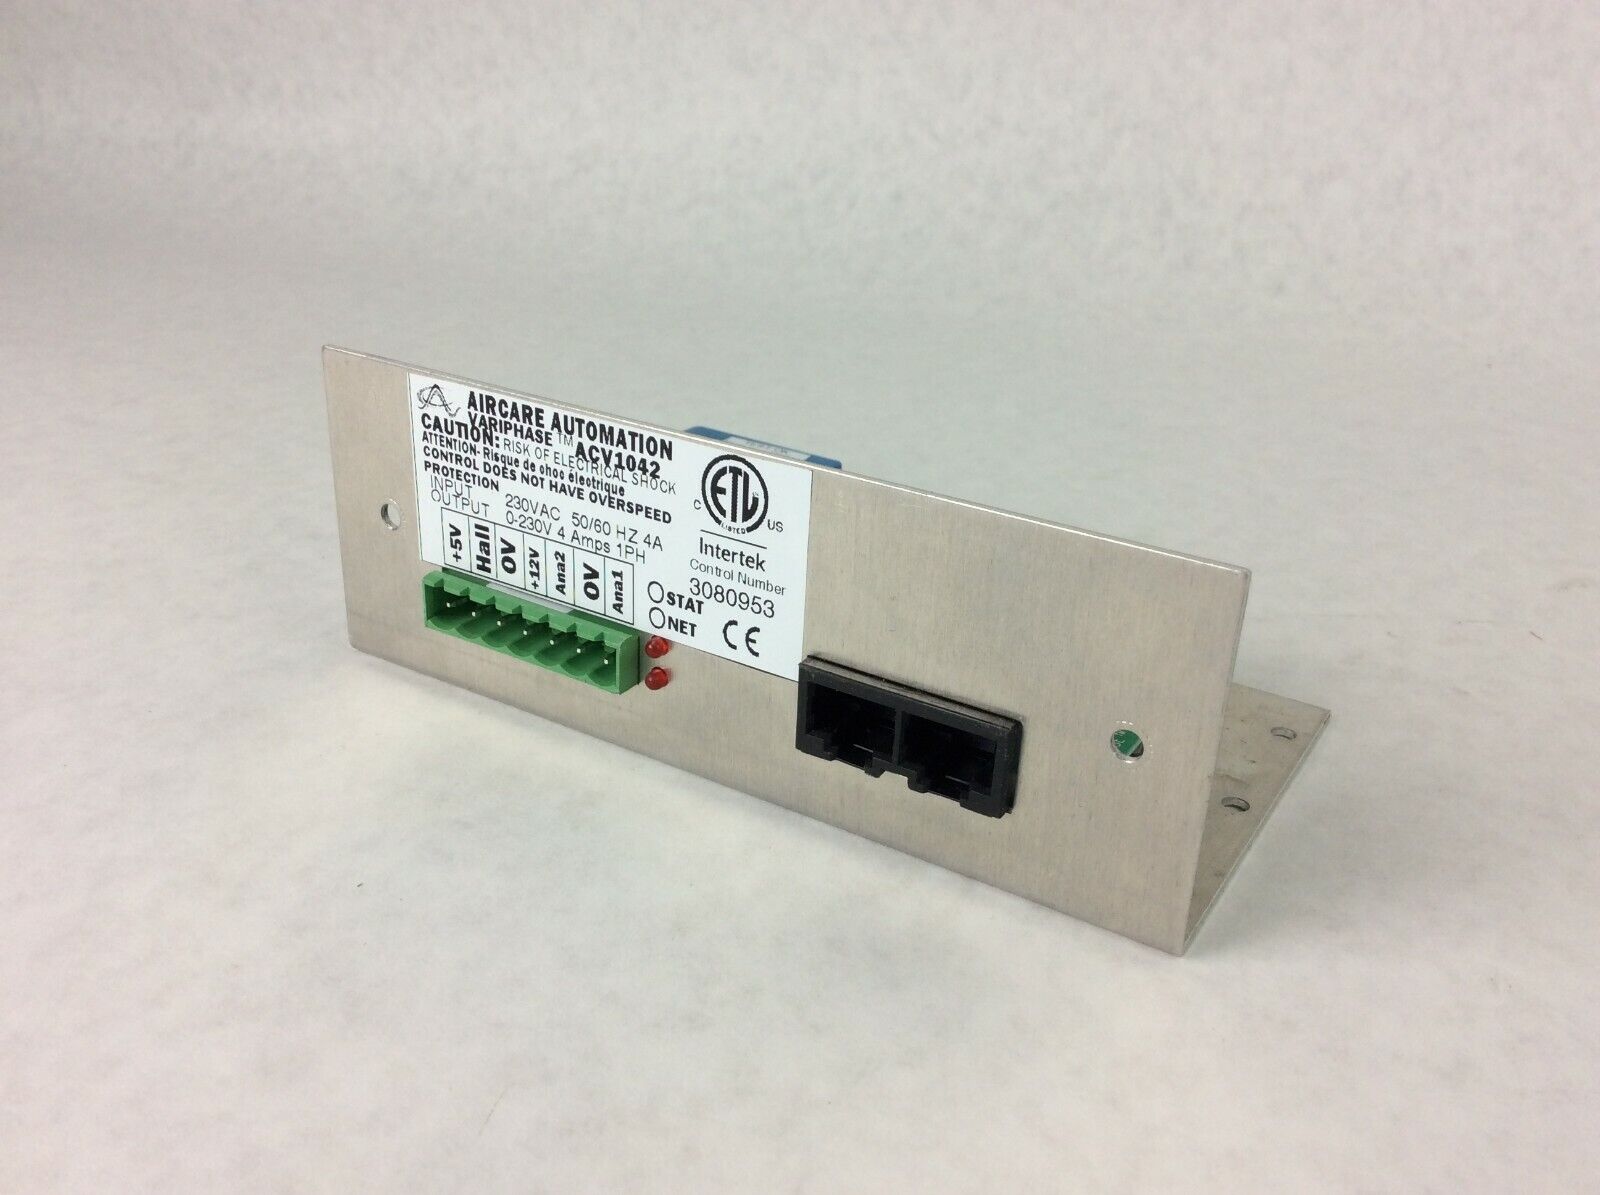 AirCare Automation VariPhase Fan Blower Phase Speed Controller ACV1042